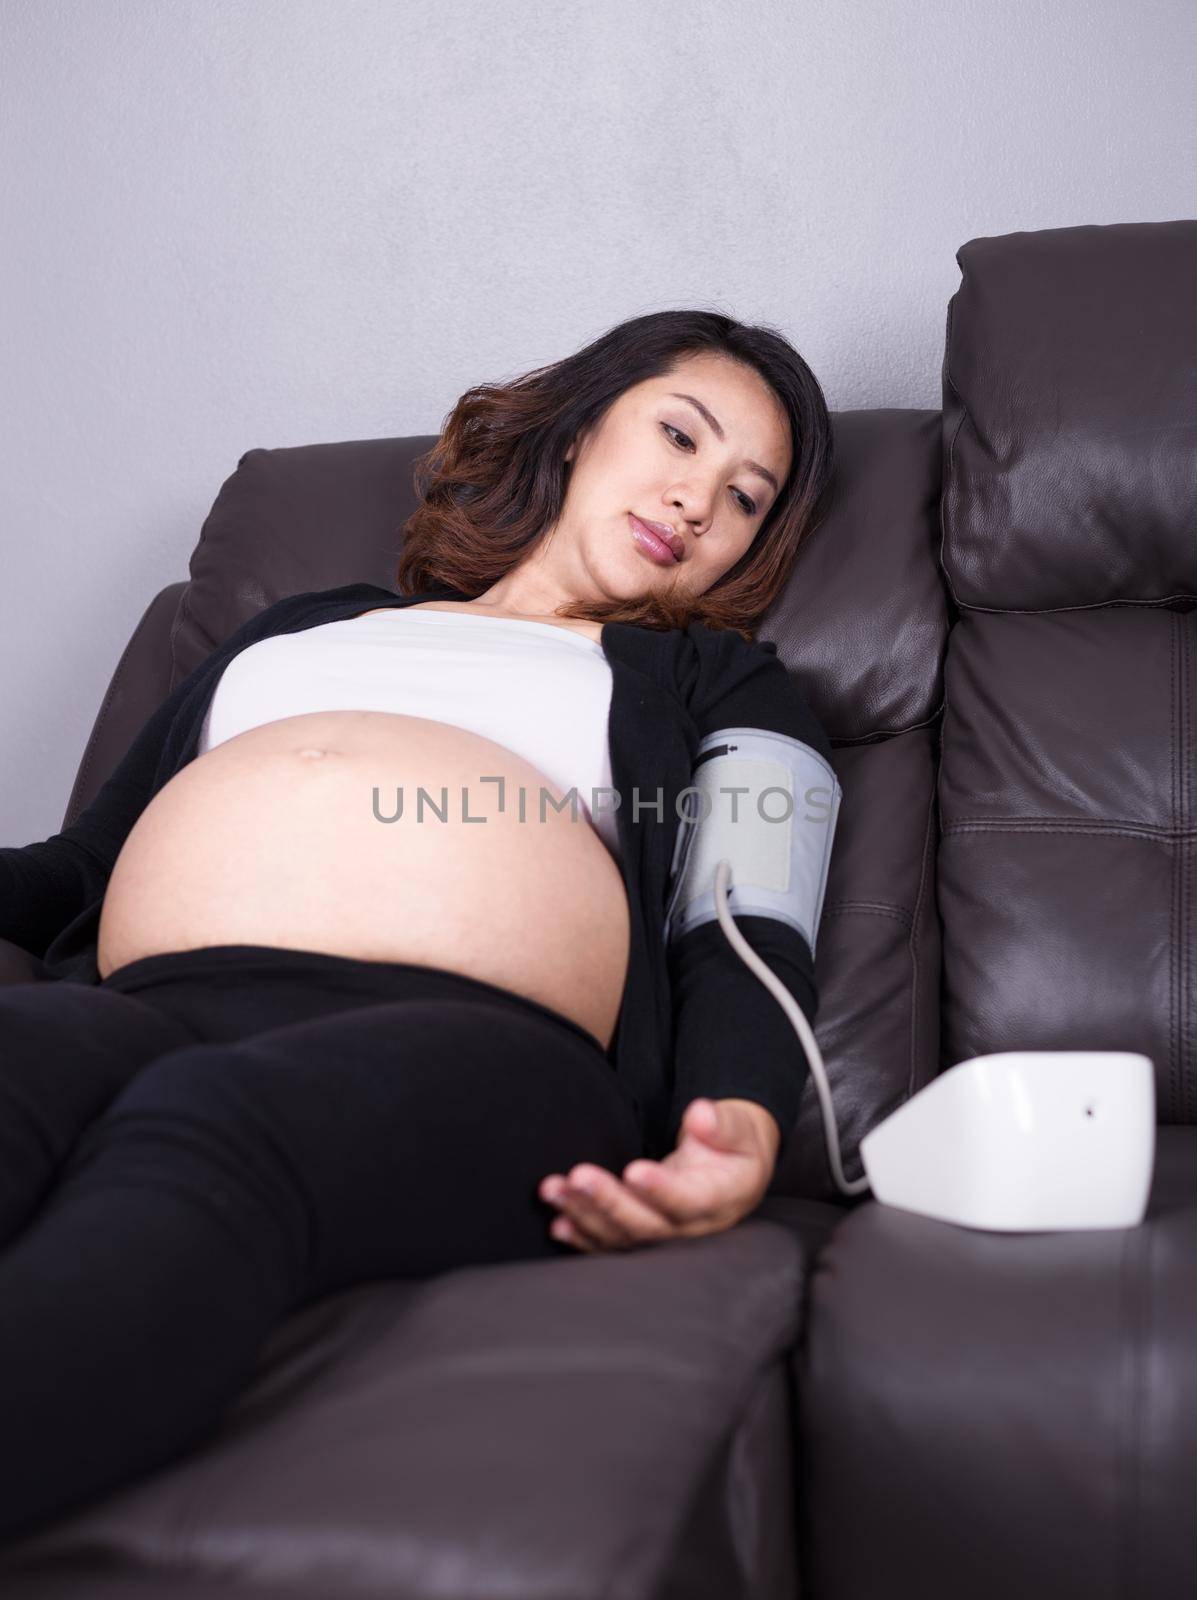 Pregnant woman measures blood pressure with automatic sphygmomanometer